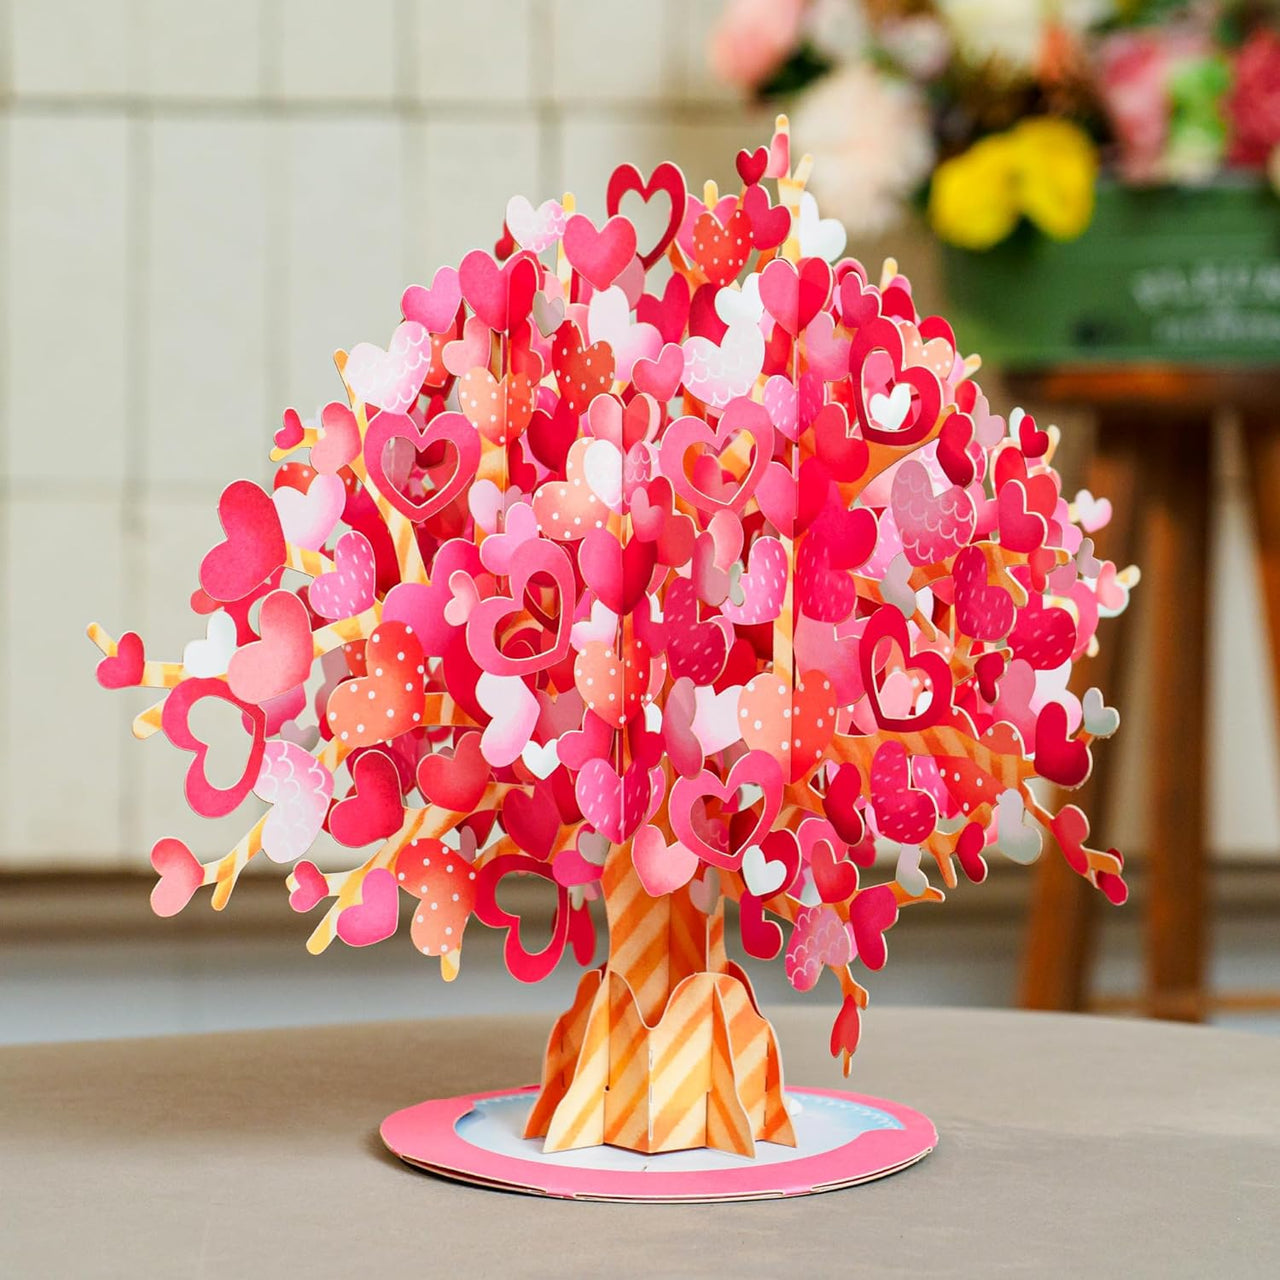 Heart Tree Pop Up Card, Oversized 10"x7" Cover